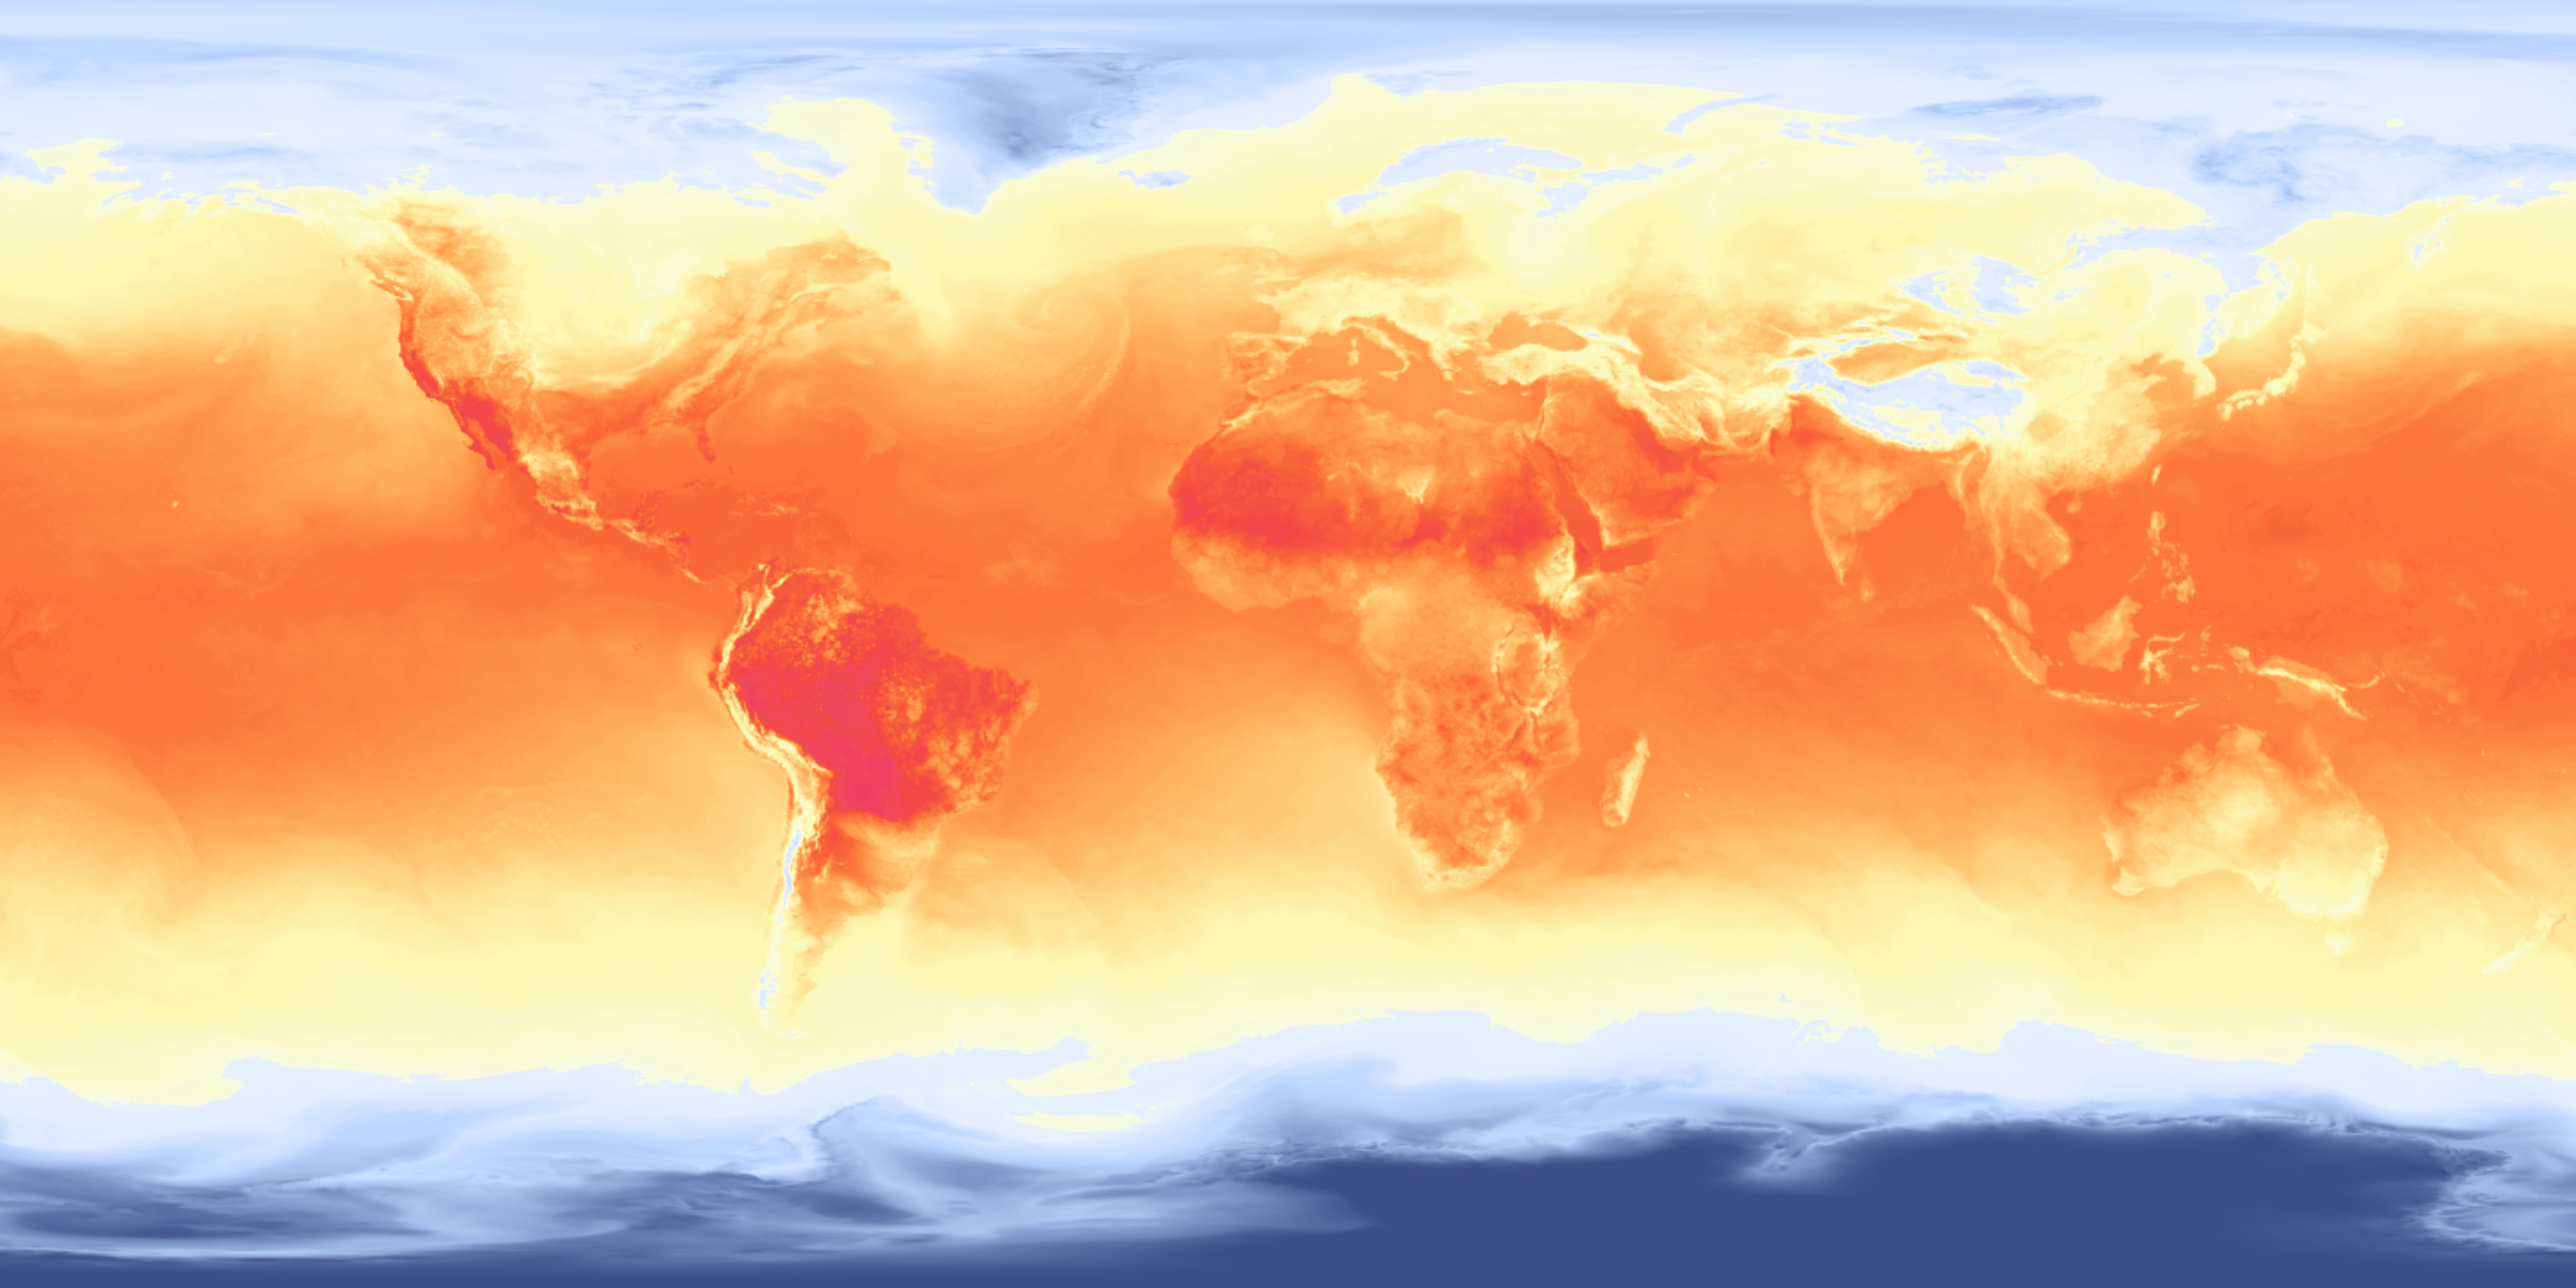 Image at top: Air Temperature at the Surface, 2pm October 6, 2023: Temperature across the planet has great variation in time and space. This imagery shows the predicted air temperature (at 2 meters). Pink and orange areas are hot; yellow areas are mild; and a distinct transition to blue occurs at the freezing point (Courtesy of NOAA - generated by CoastalCare.org via View Global Data Explorer website, Public Domain).